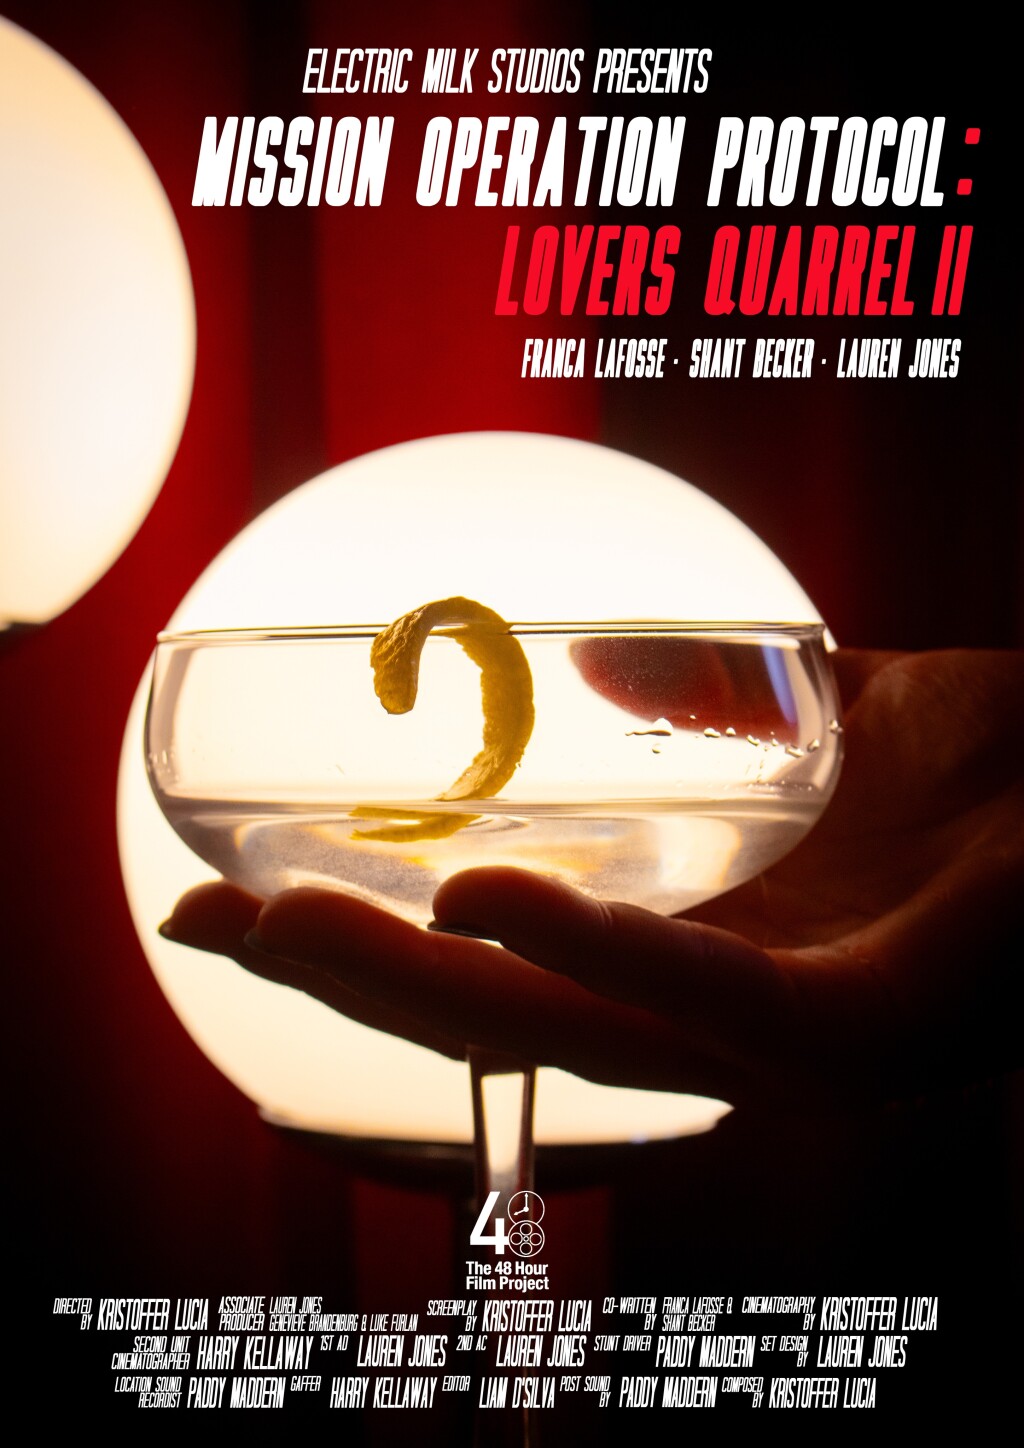 Filmposter for MISSION OPERATION PROTOCOL: LOVERS’ QUARREL II